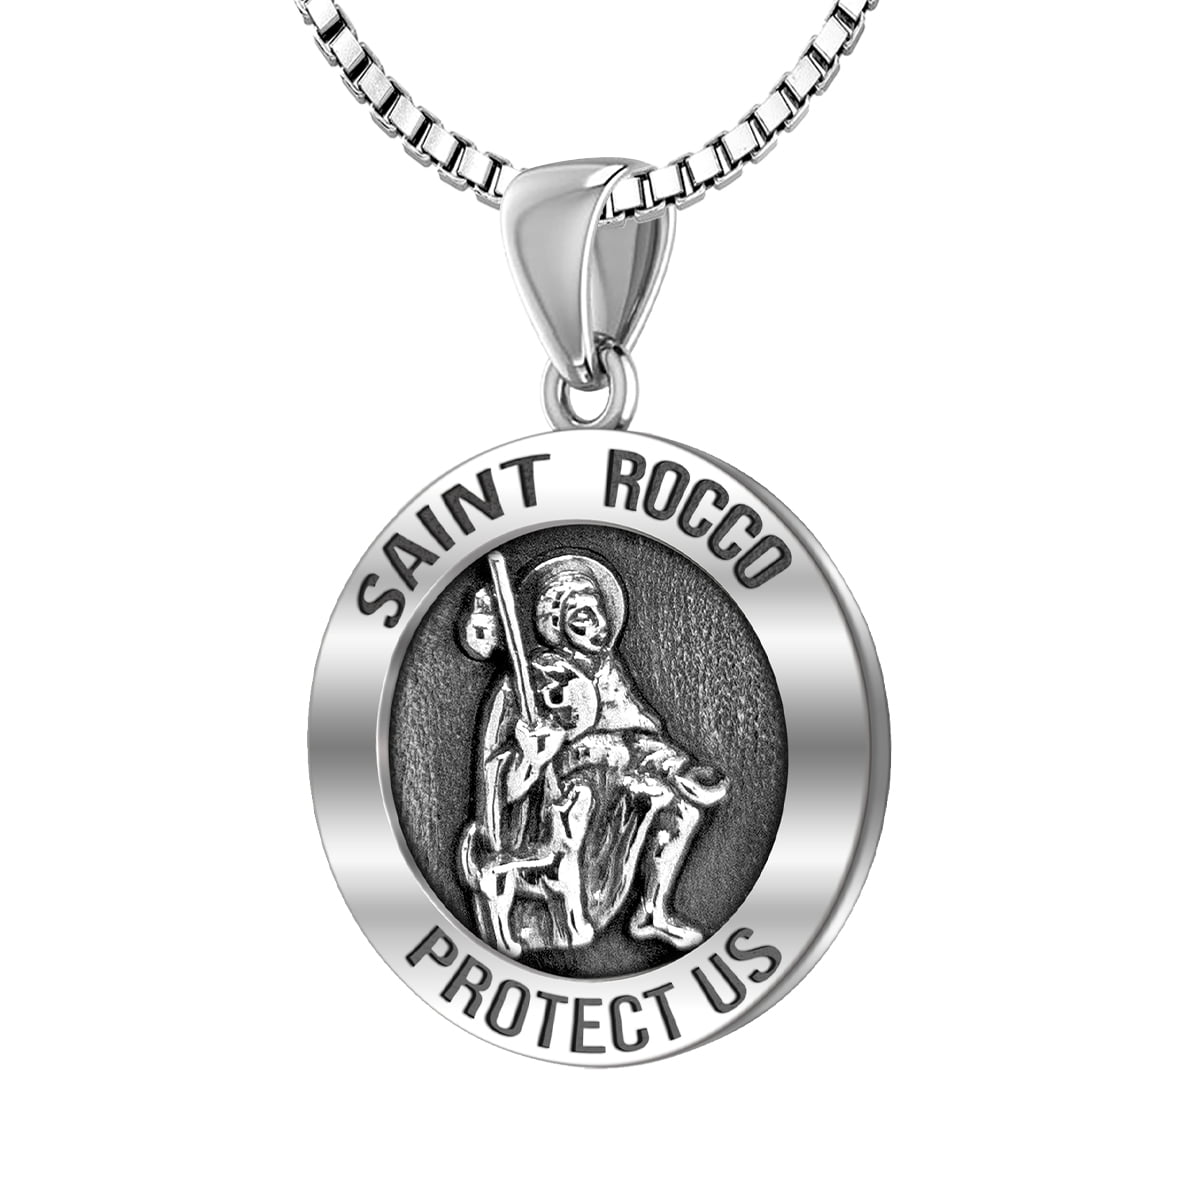 18mm x 25mm Solid 925 Sterling Silver Antique-Style Mother & Daughter Pendant Charm 